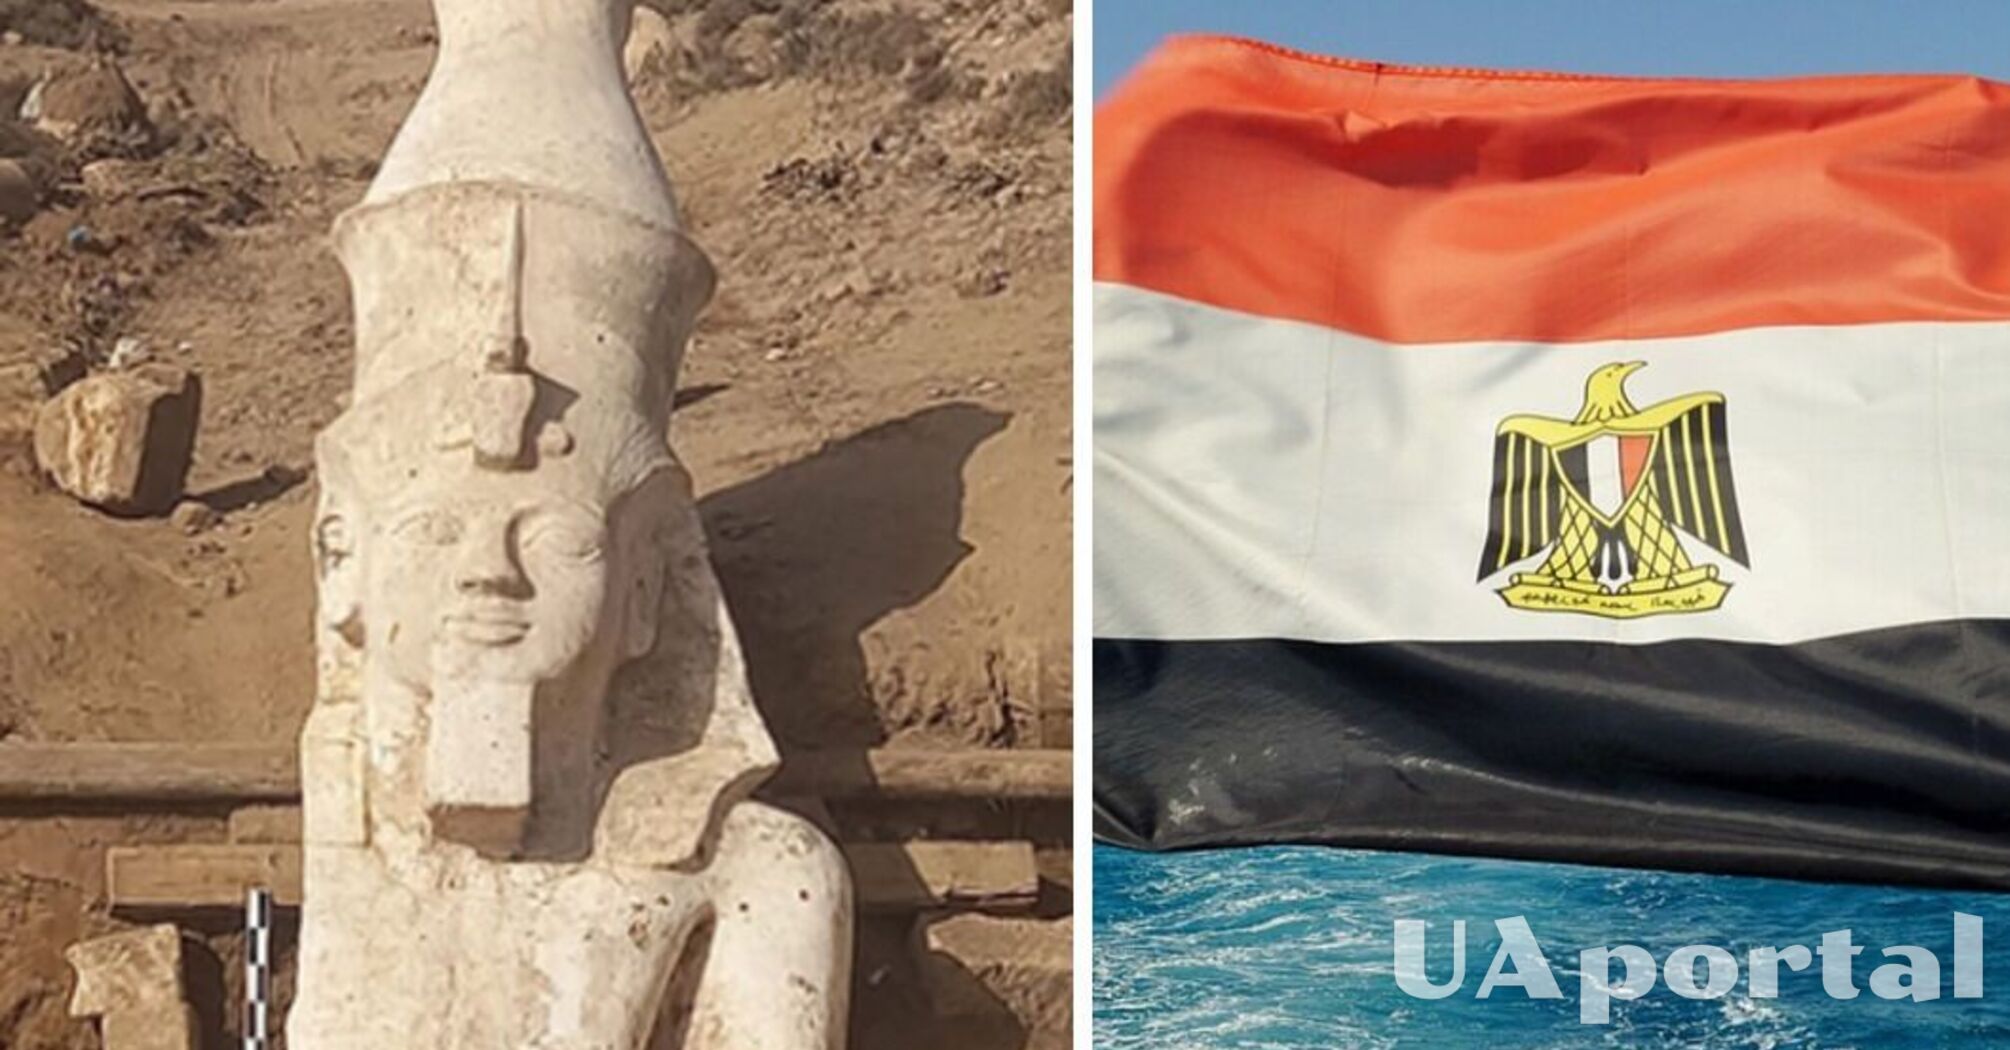 Giant statue of Ramses II discovered in Egypt (photo)